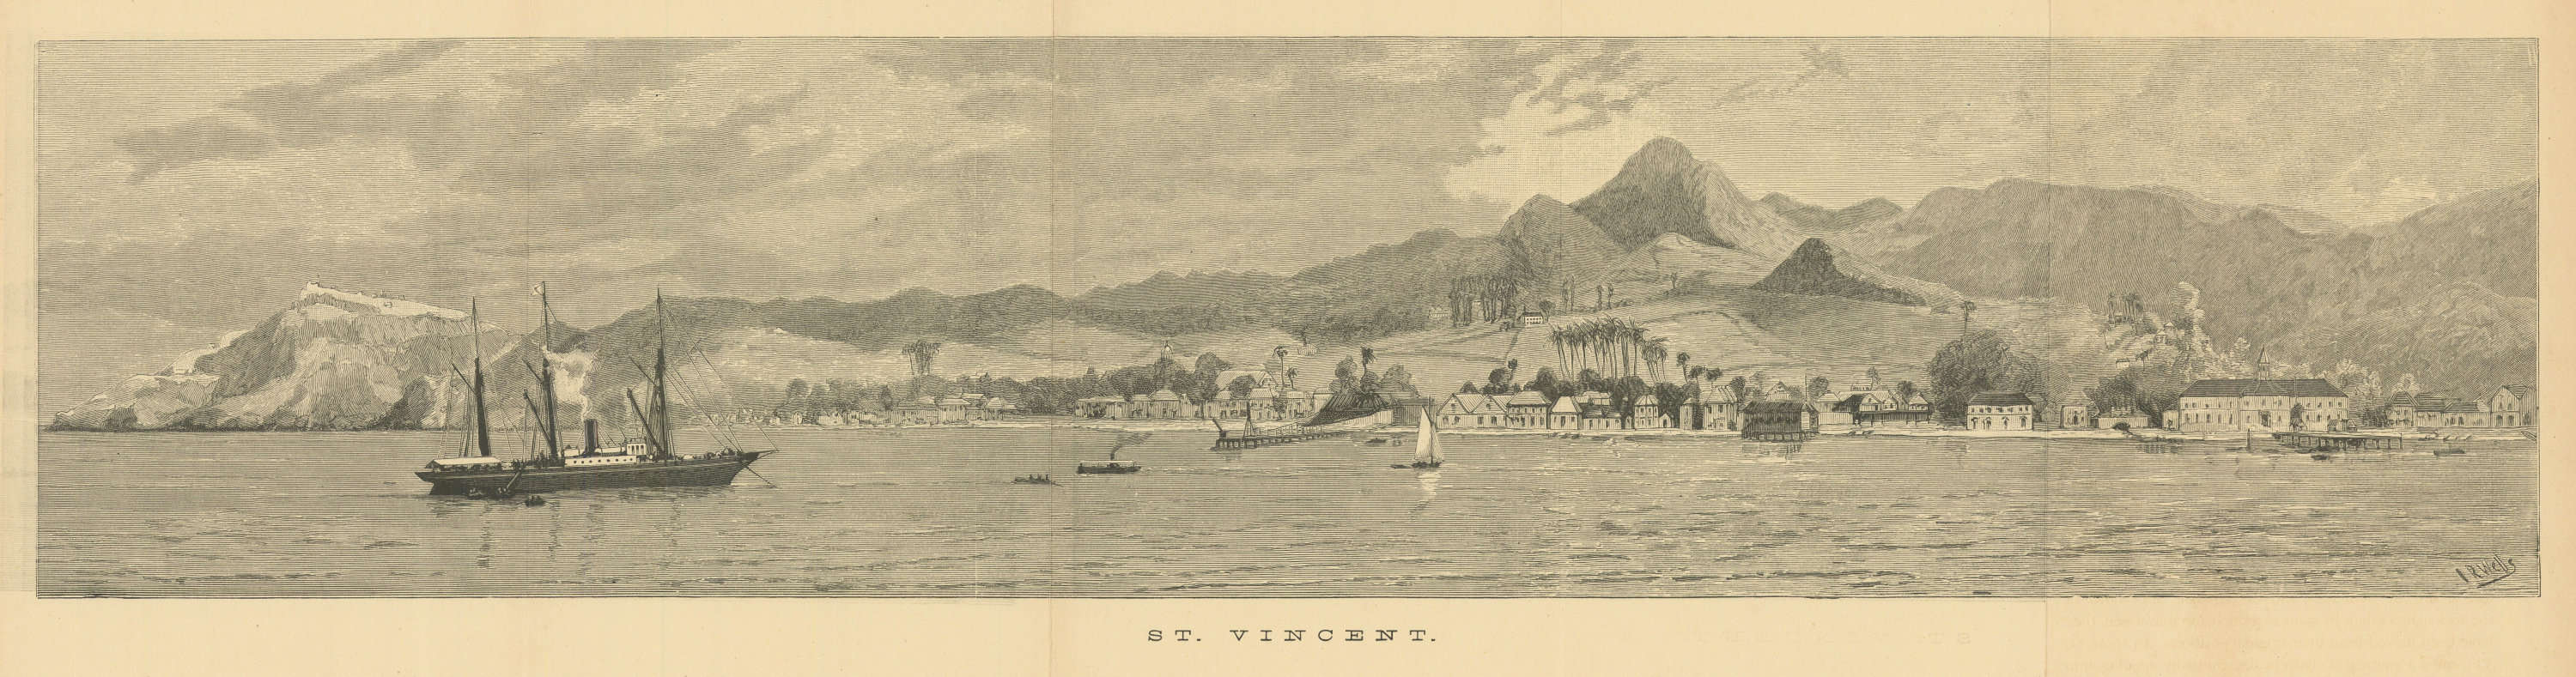 Associate Product St. Vincent, West Indies. Panorama of Kingstown from the sea 1889 old print